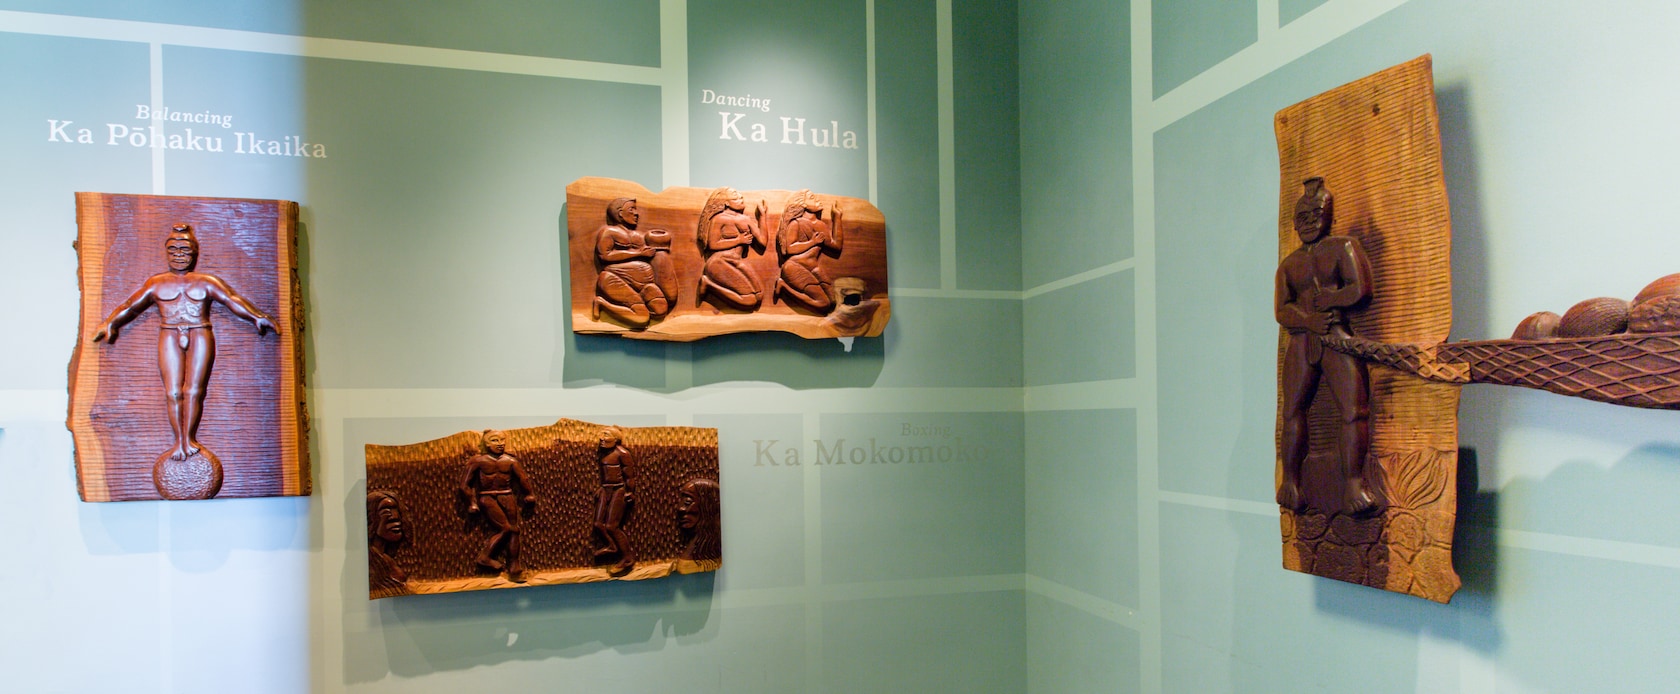 Wood relief carvings of natives engaged in various activities, with descriptive Hawaiian phrases and their English translations